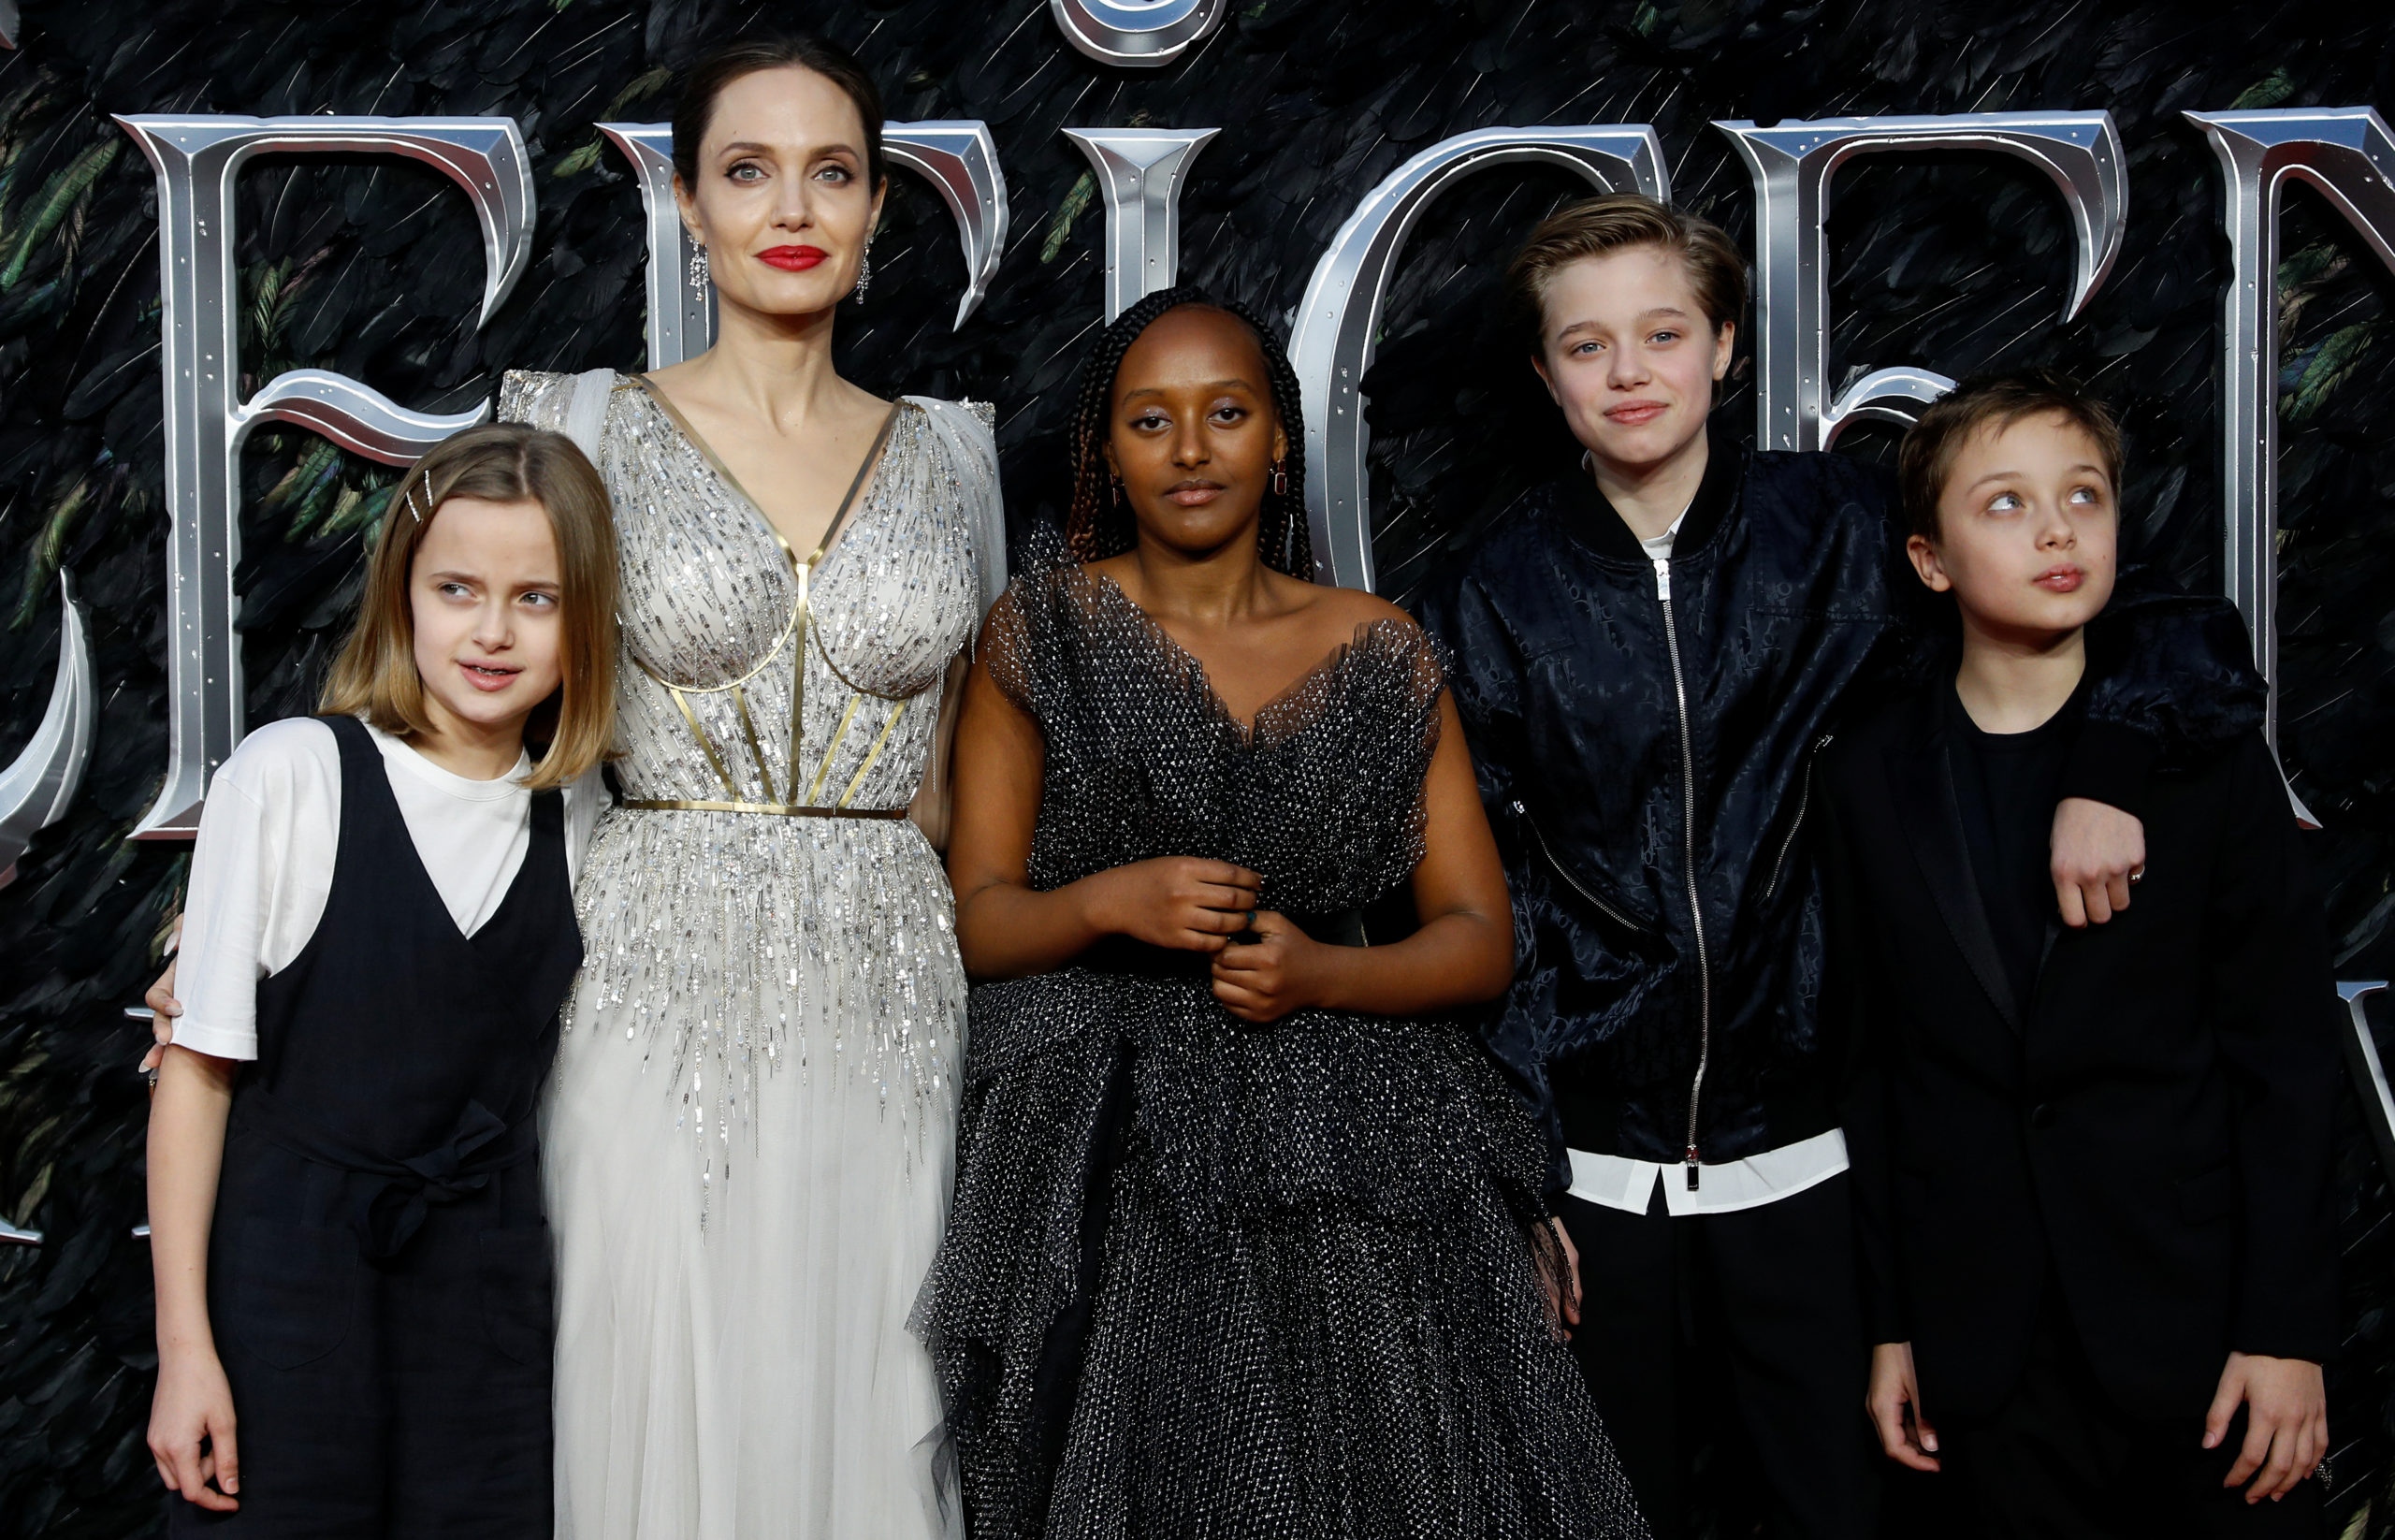 Actor Angelina Jolie, accompanied by her kids, poses as she attends the UK premiere of "Maleficent: Mistress of Evil" in London, Britain October 9, 2019. REUTERS/Peter Nicholls